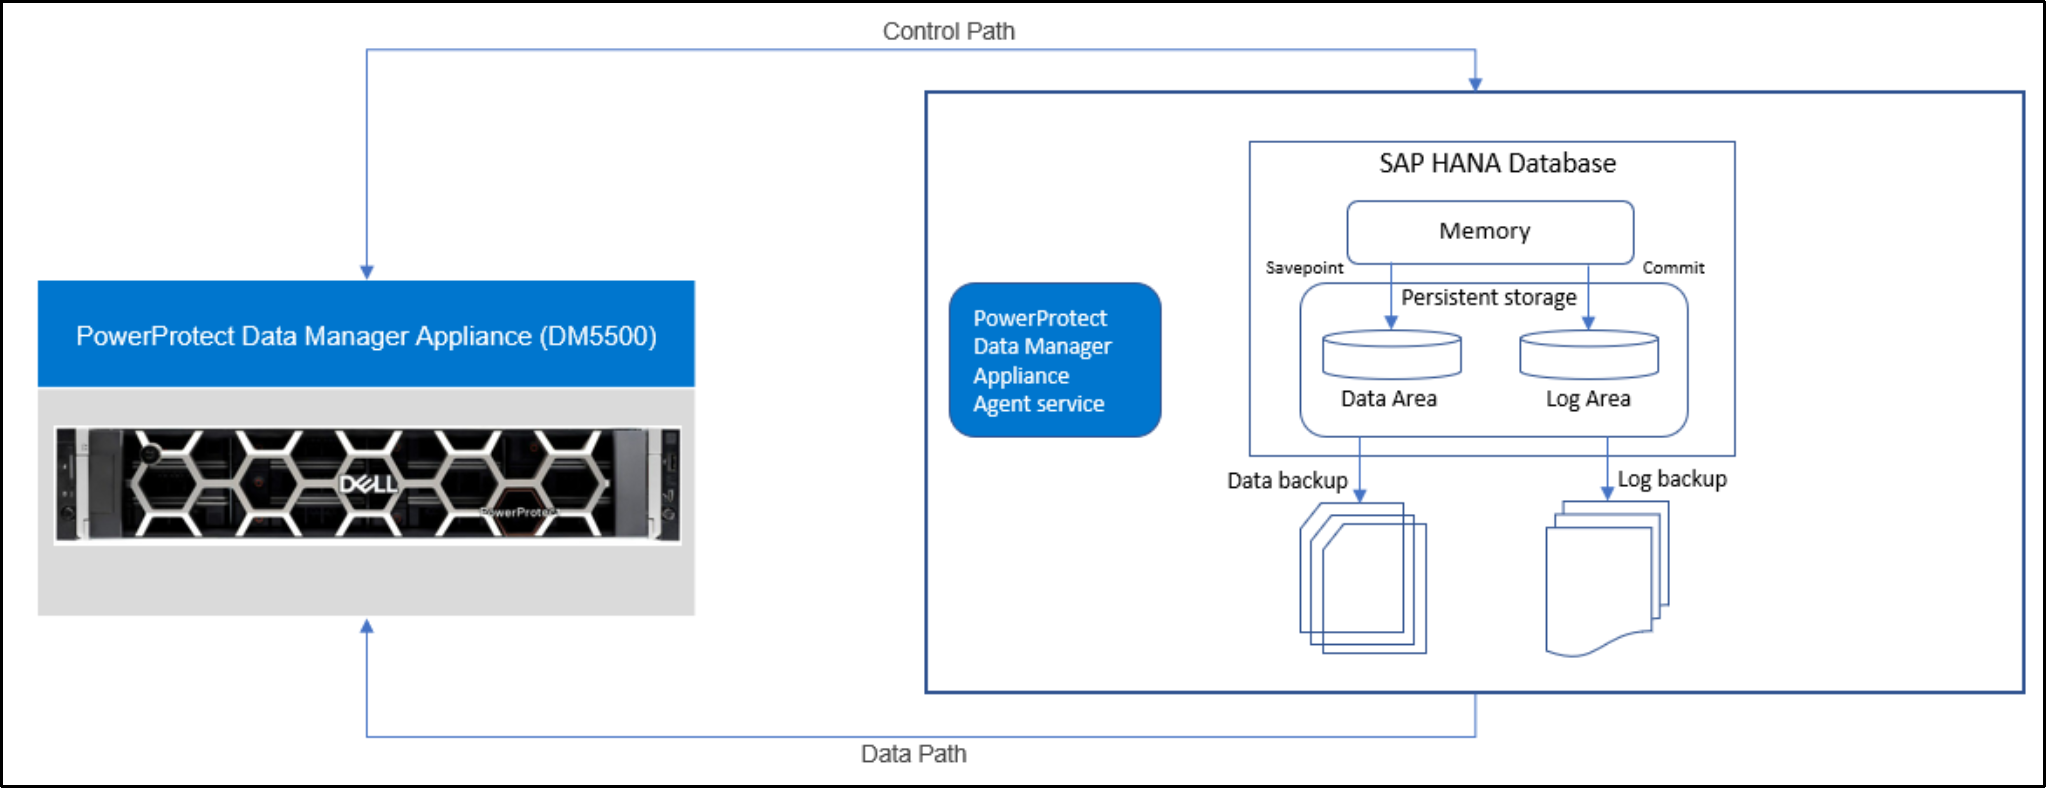 The image shows SAP HANA database protection with the Data Manager Appliance